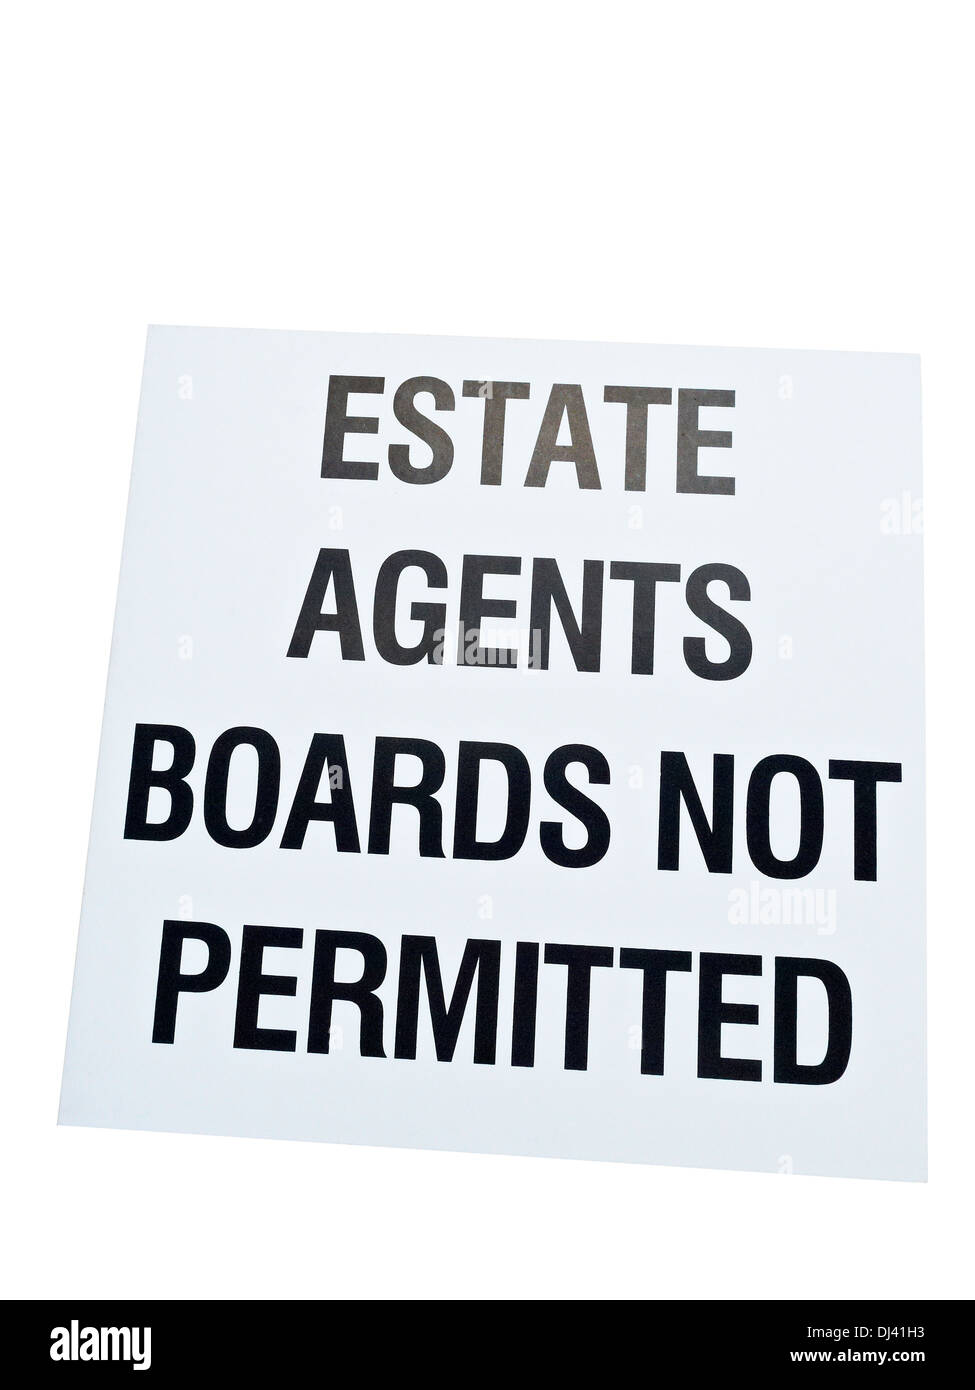 Estate agents boards not permitted sign UK Stock Photo